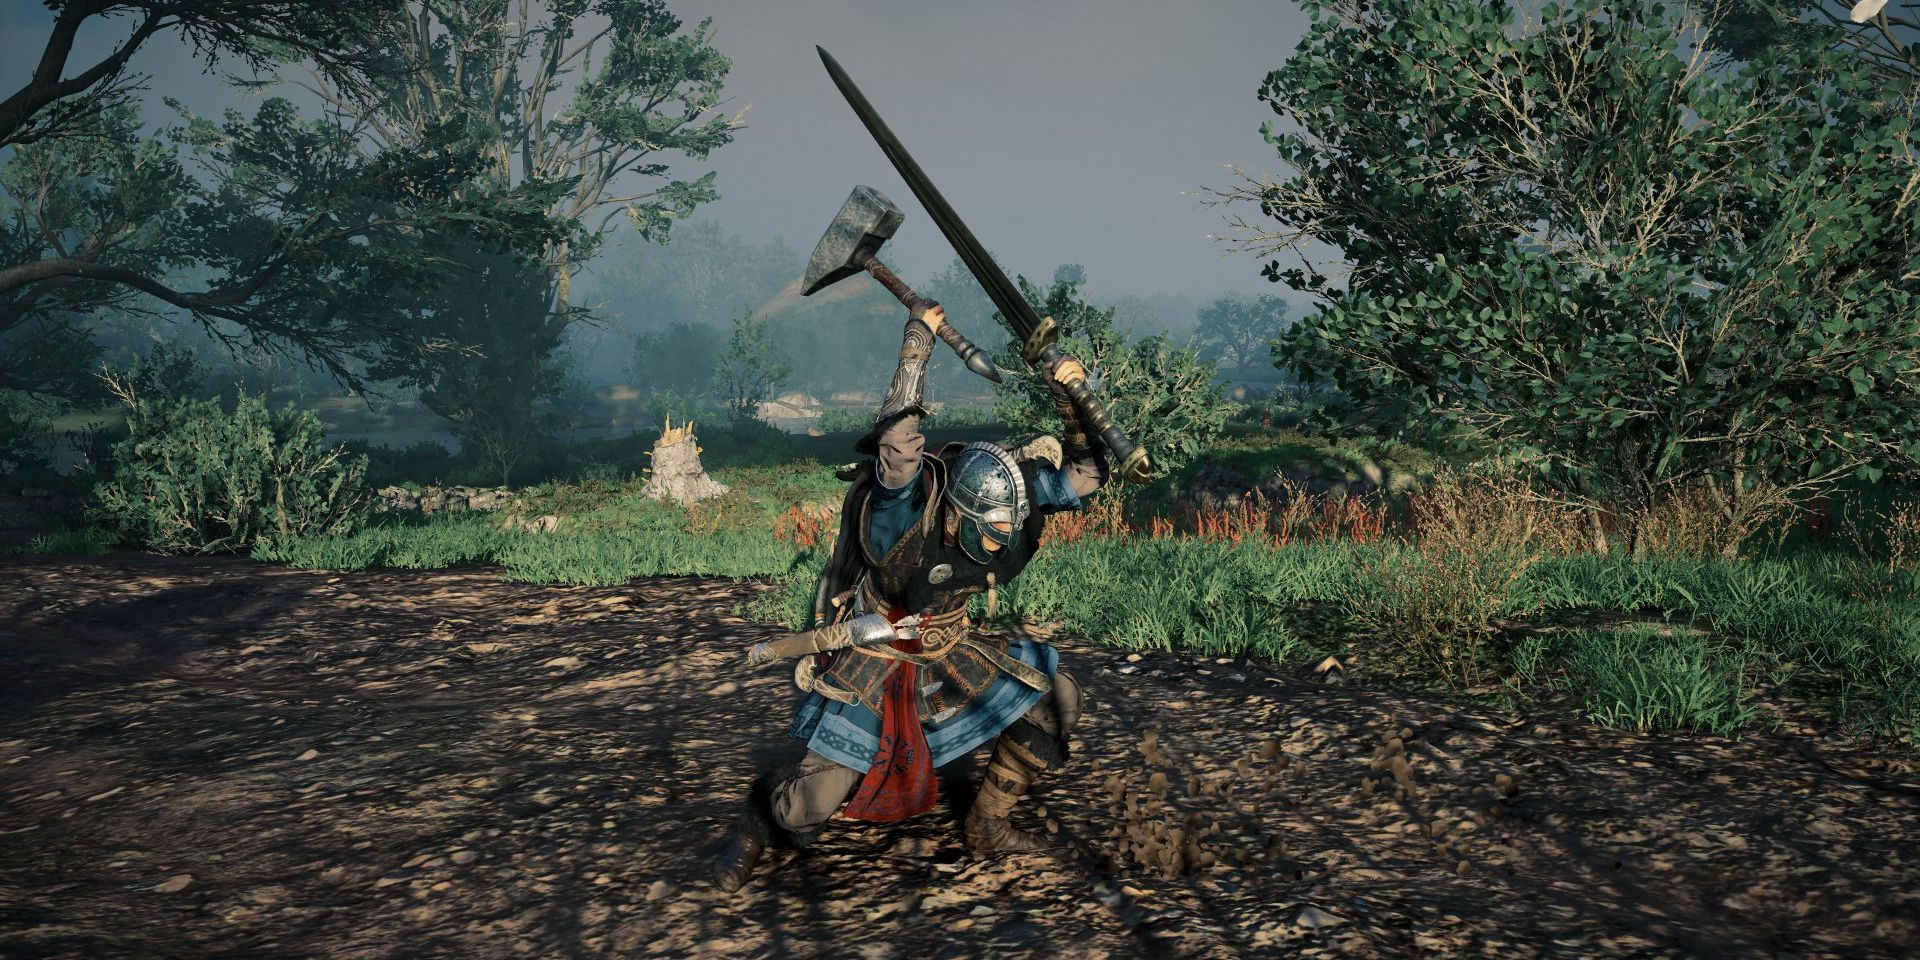 player wielding a hammer in main hand and great sword in secondary hand.